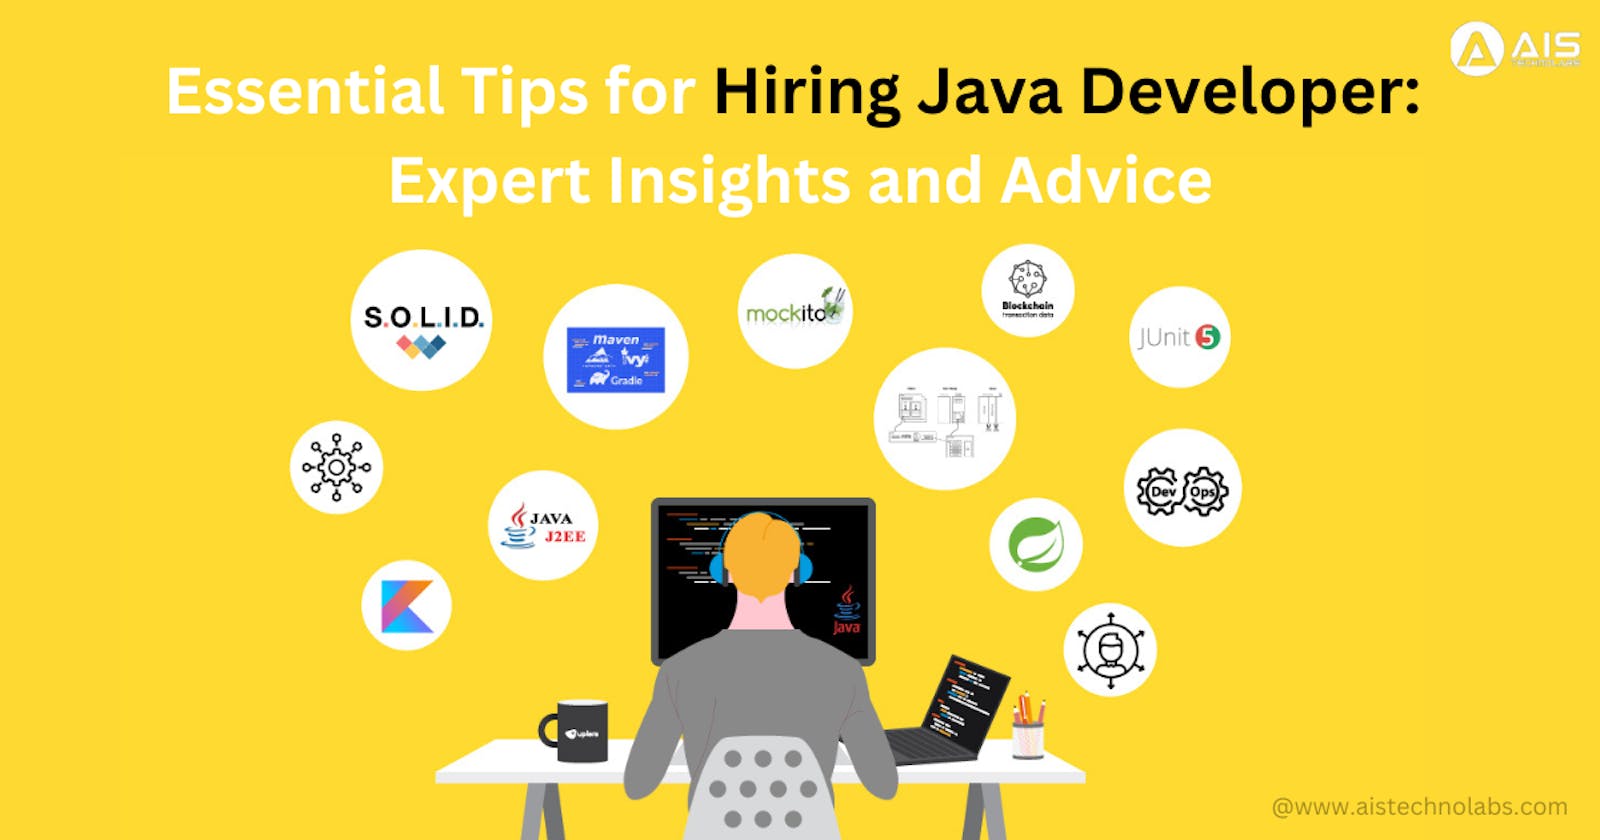 Essential Tips for Hiring Java Developer: Expert Insights and Advice